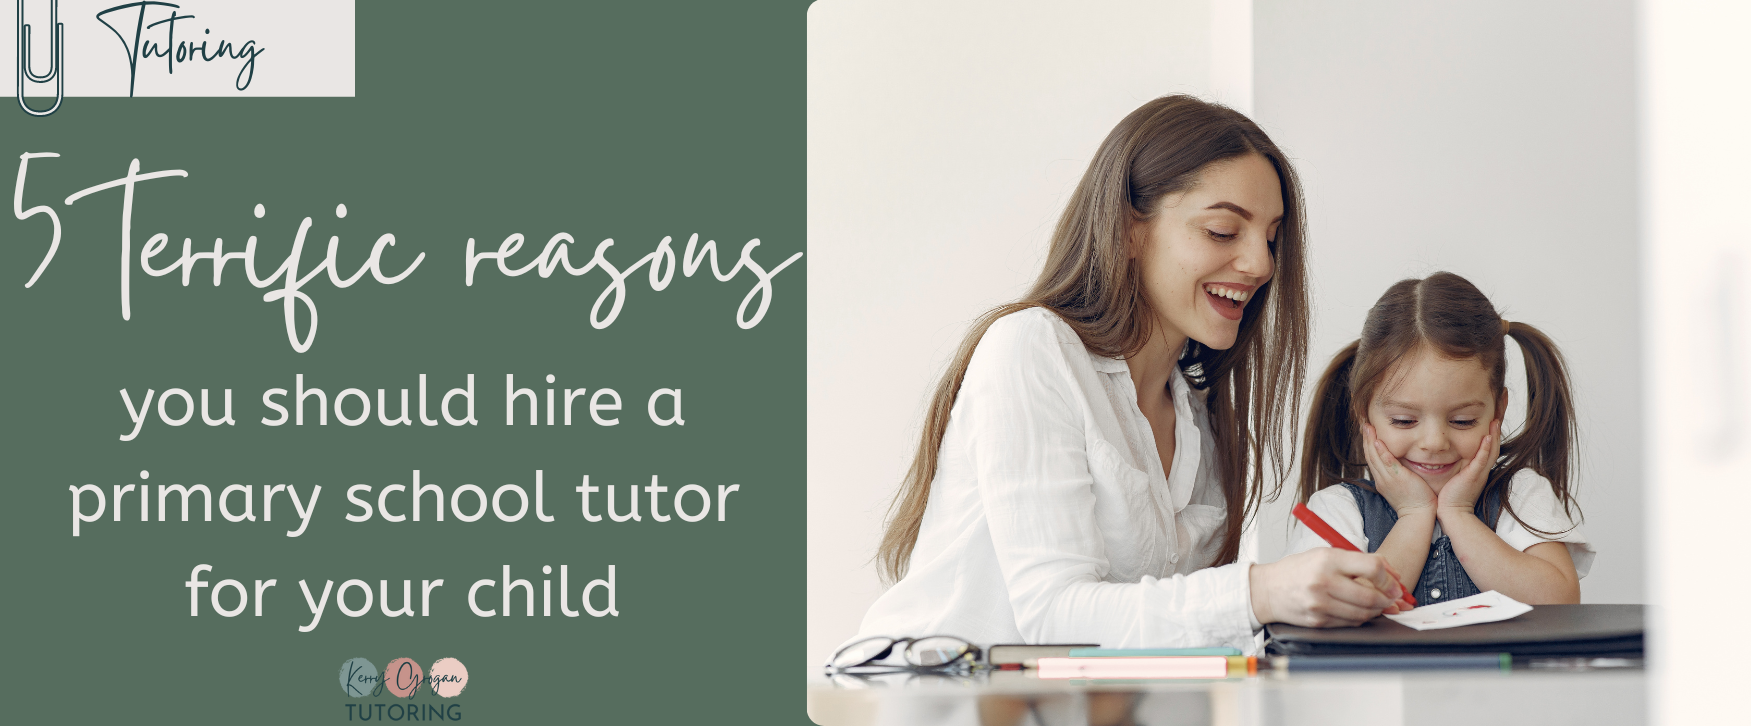 5 terrific reasons you should hire a primary school tutor for your child